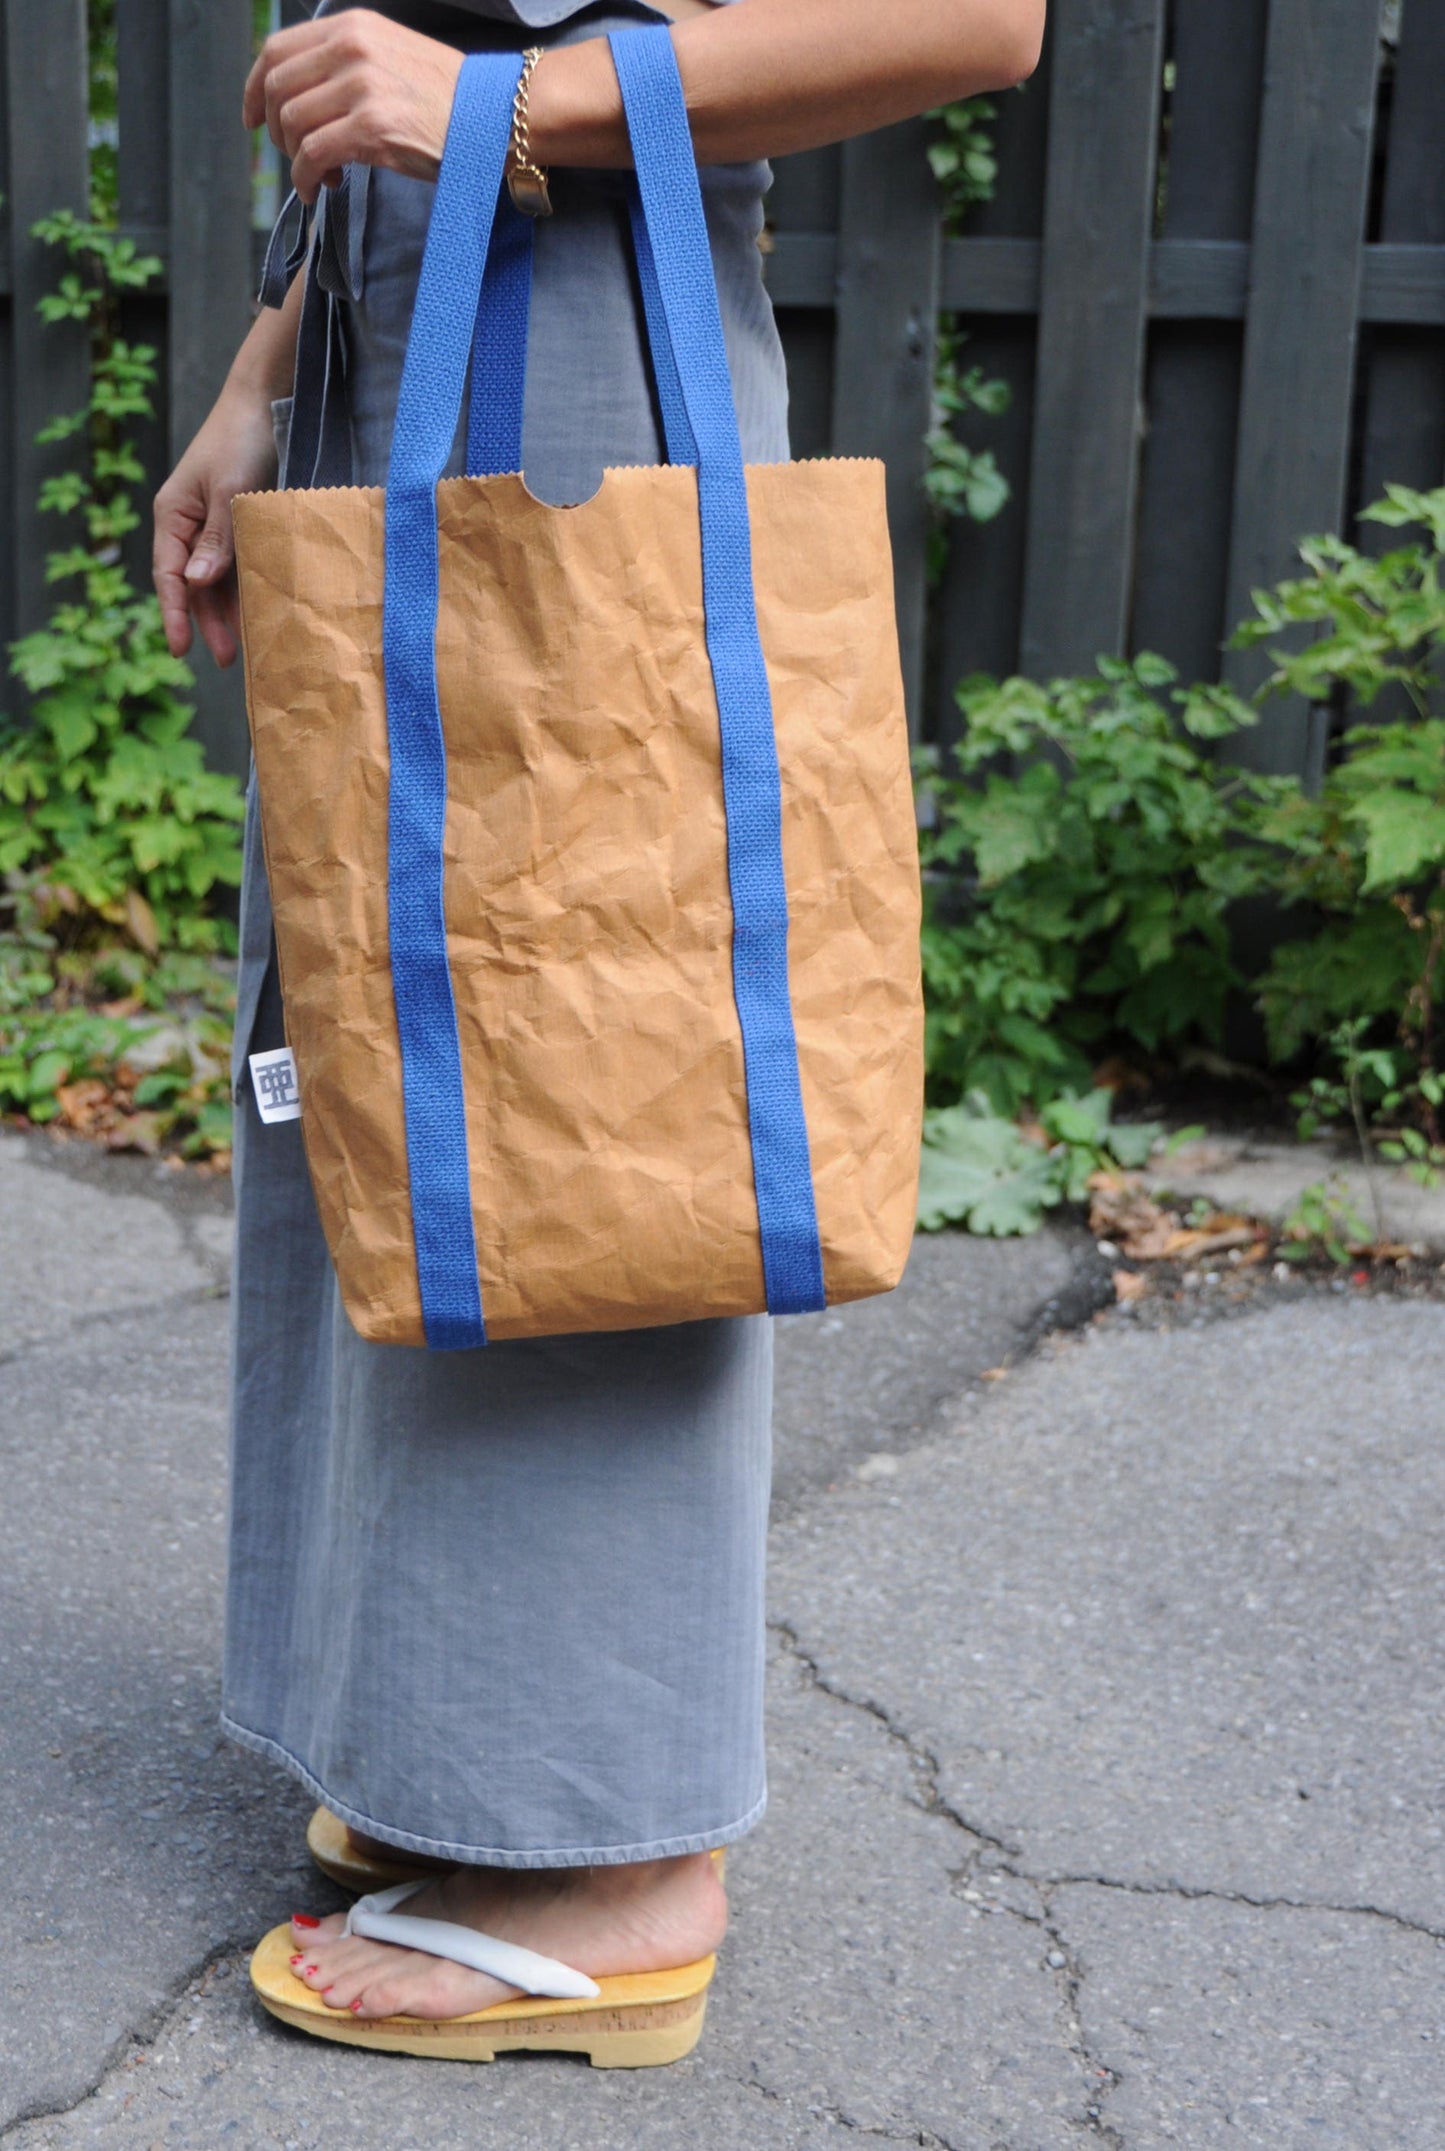 Black Two ways bag; Backpack and Tote back made from washable & reusable brown kraft paper